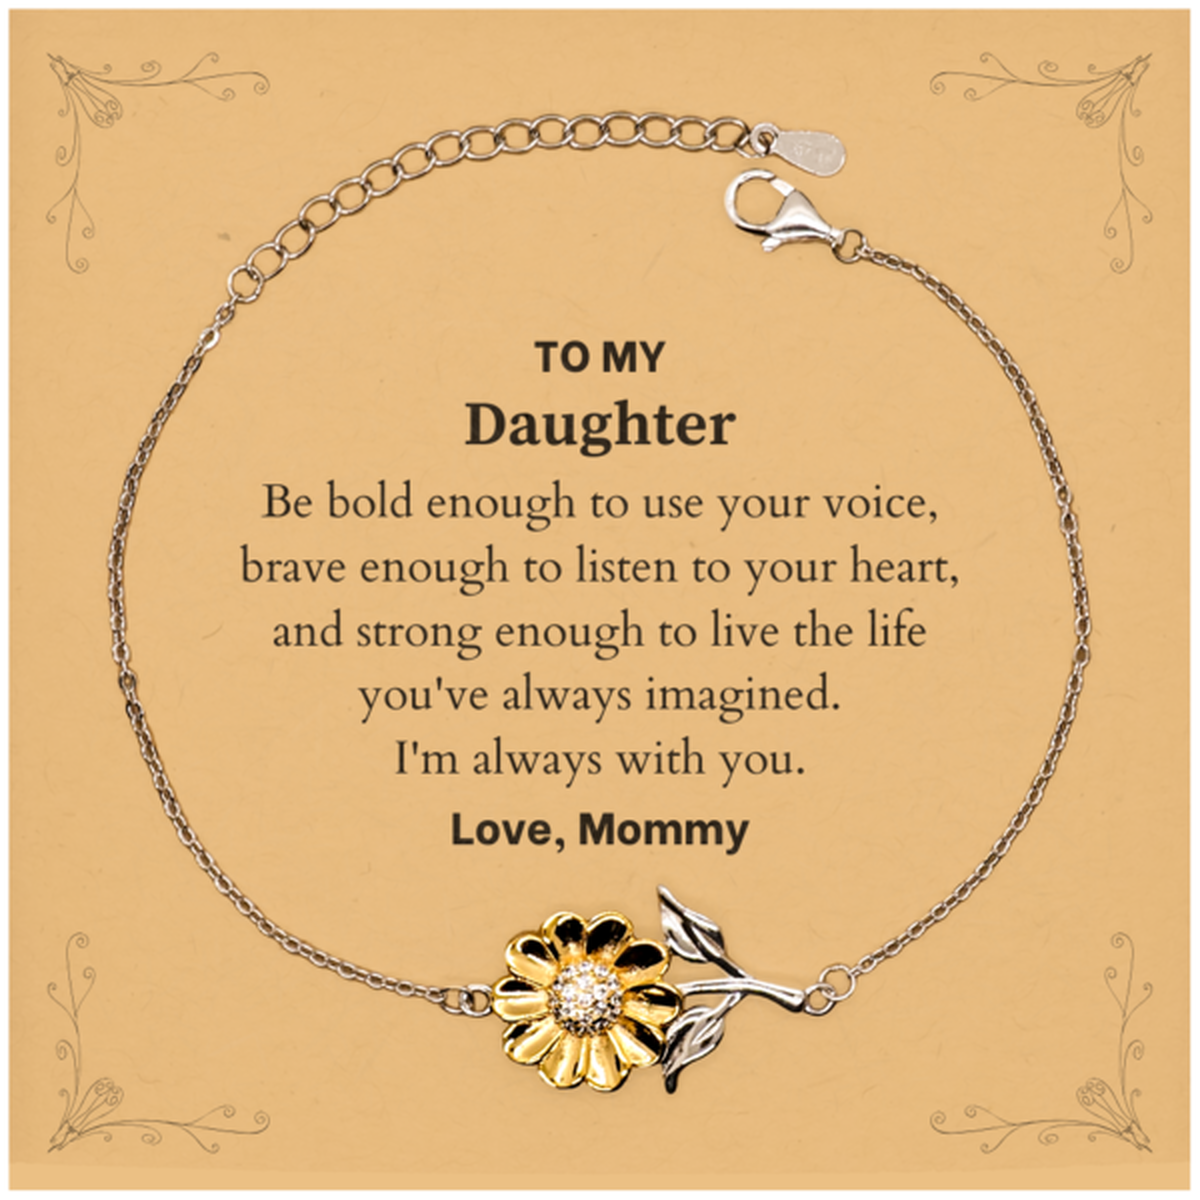 Keepsake Daughter Sunflower Bracelet Gift Idea Graduation Christmas Birthday Daughter from Mommy, Daughter Be bold enough to use your voice, brave enough to listen to your heart. Love, Mommy